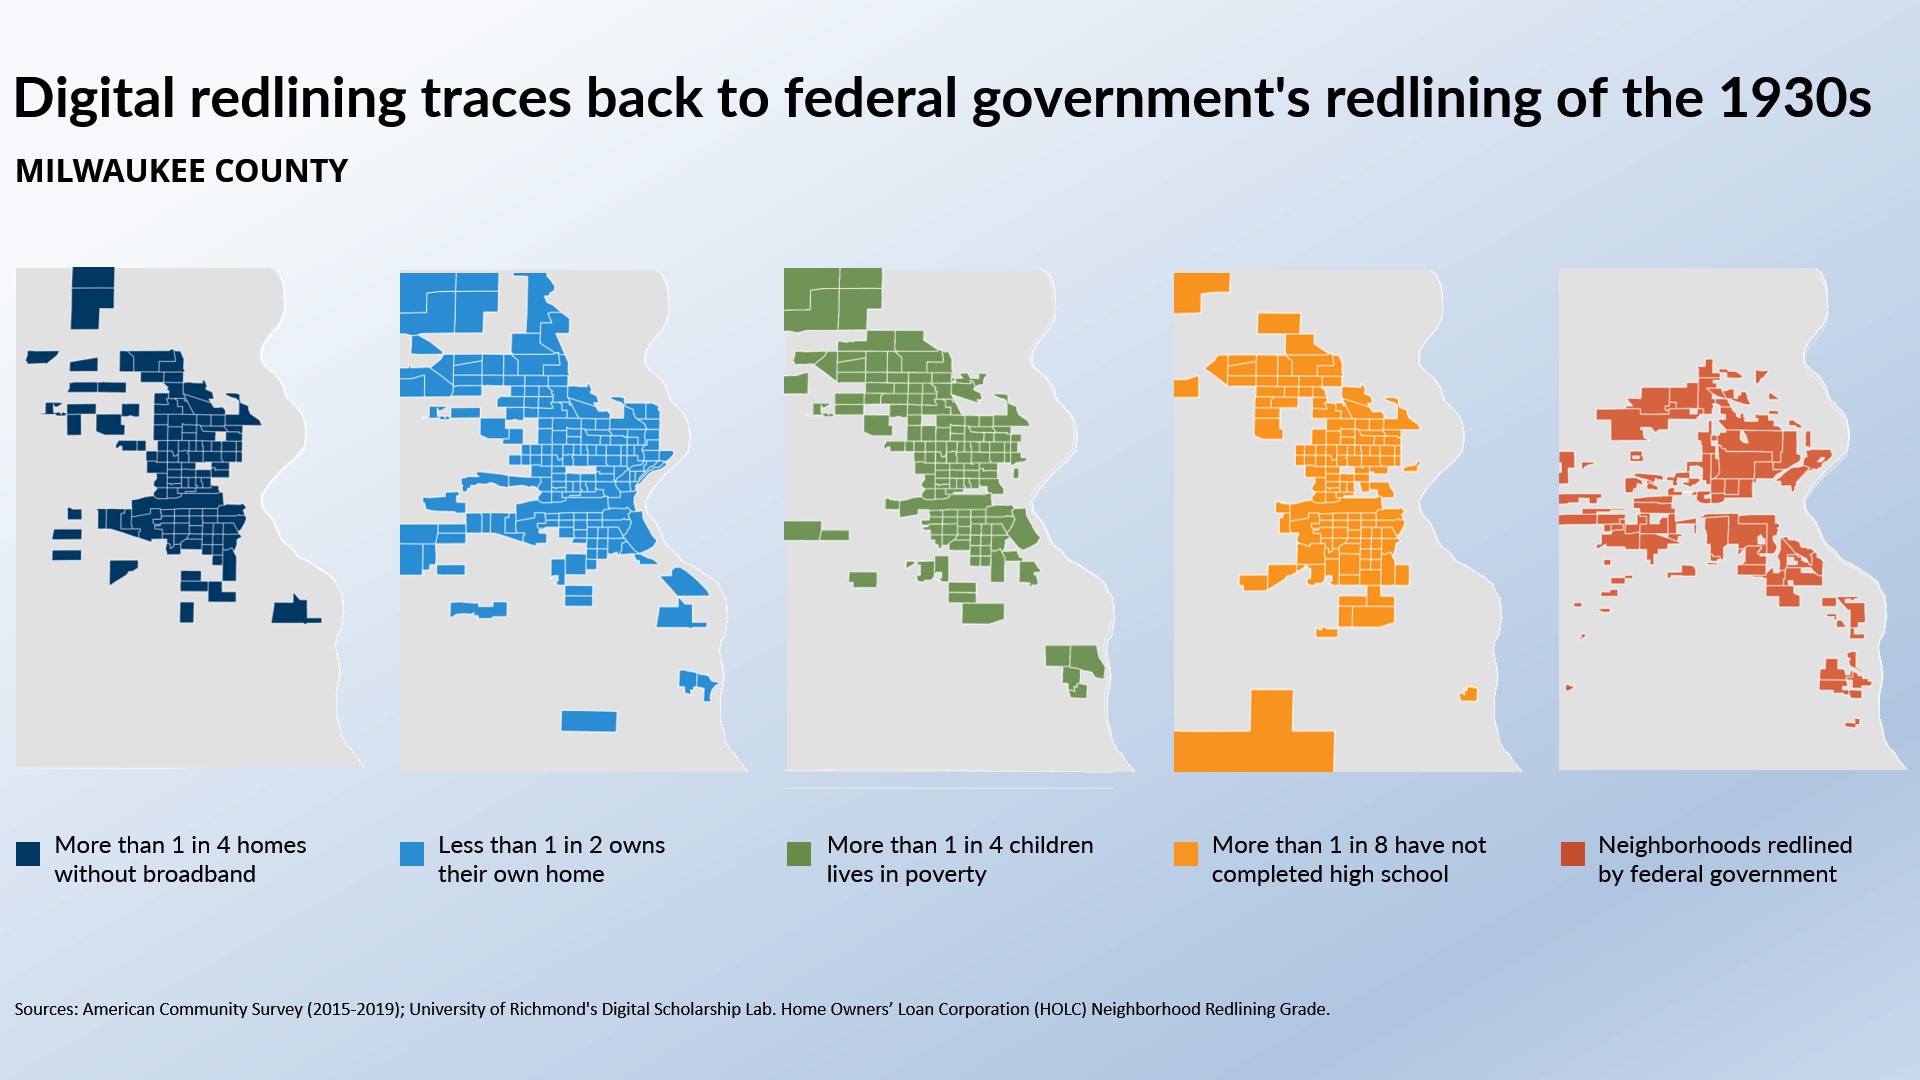 Infographic titled "Digital redlining traces back to federal government's redlining of 1930s" and showing five maps of Milwaukee Wisconsin with similar patterns of census tracks experiencing redlining from the 1930s, lack of broadband access, low homeownership rates, high child poverty rates, and low high school graduation rates.